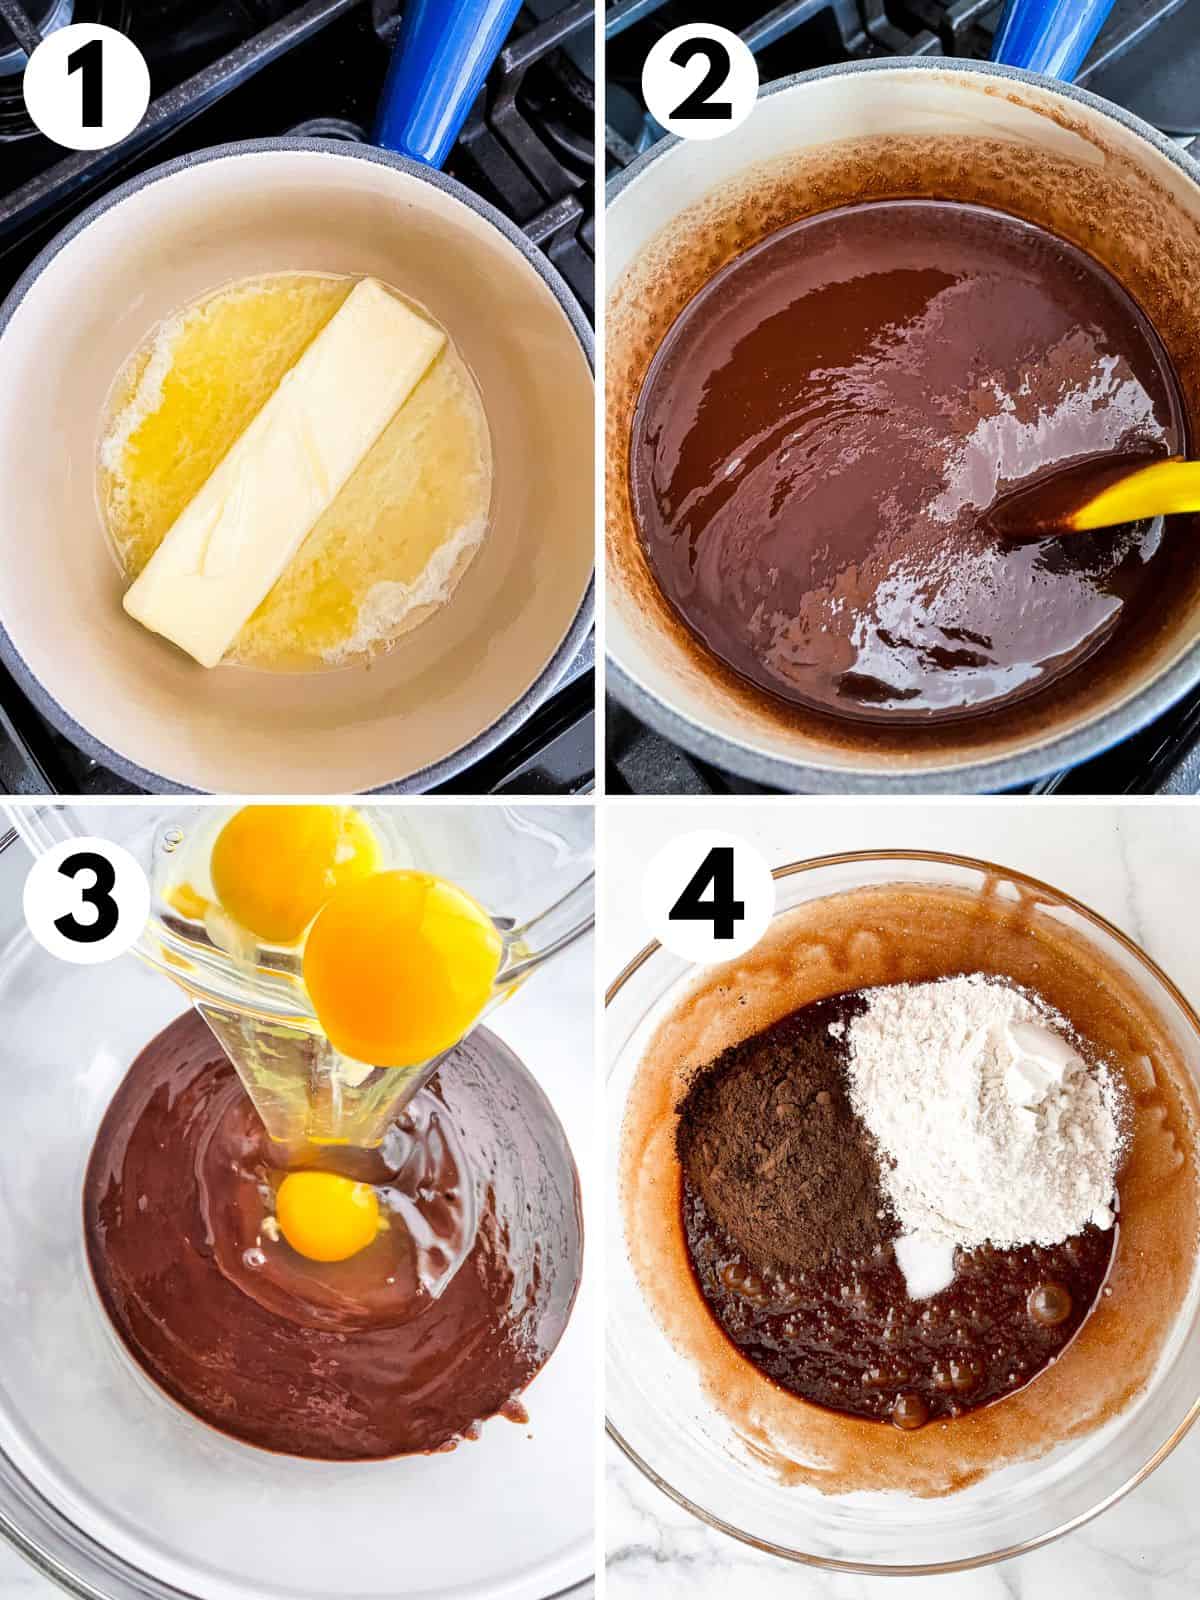 Steps for making gluten-free brownies. 1. A stick of butter melts in a pan. 2. Sugar and chocolate are stirred into the melted butter. 3. Three eggs are added to the chocolate-butter mixture. 4. Cocoa powder, gluten-free flour, and salt sit on top of the egg, butter, chocolate mixture.